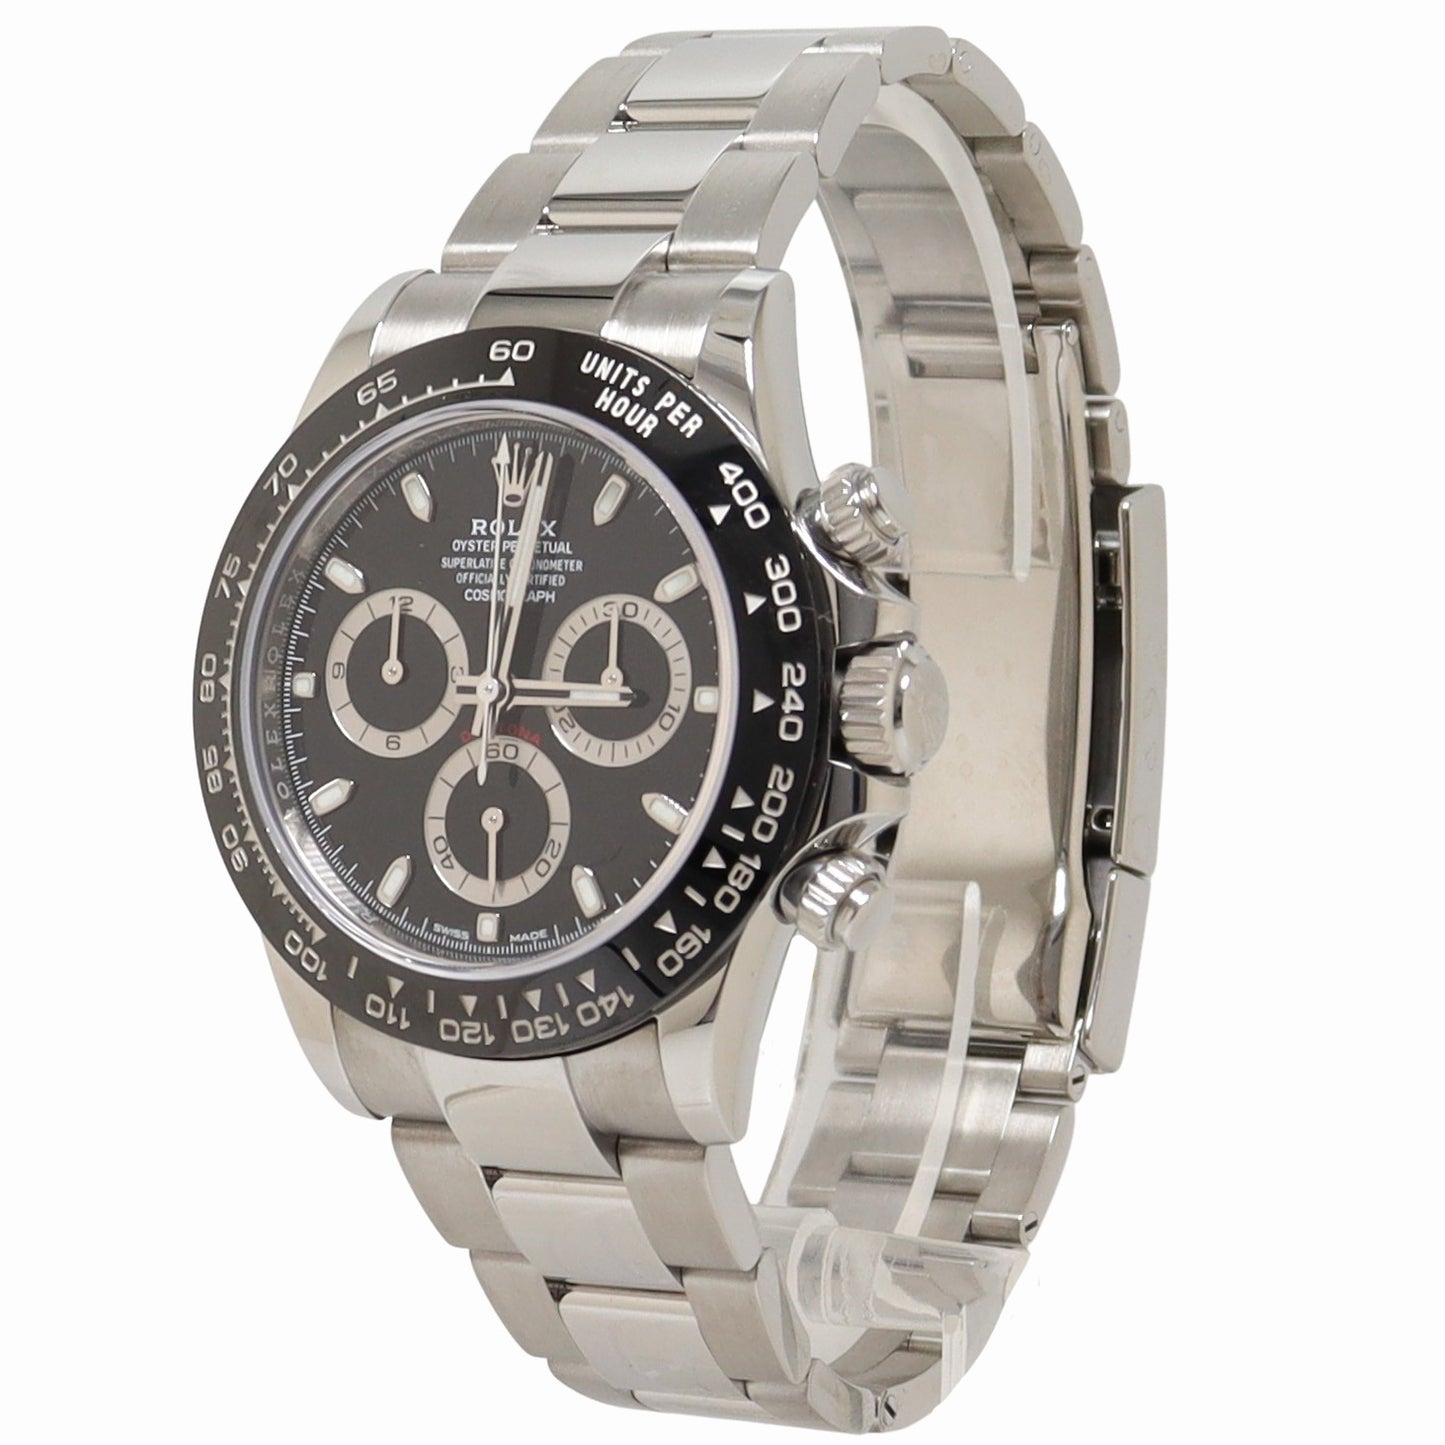 Load image into Gallery viewer, Rolex Daytona Stainless Steel 40mm Black Chronograph Dial Watch Reference#: 116500LN - Happy Jewelers Fine Jewelry Lifetime Warranty
